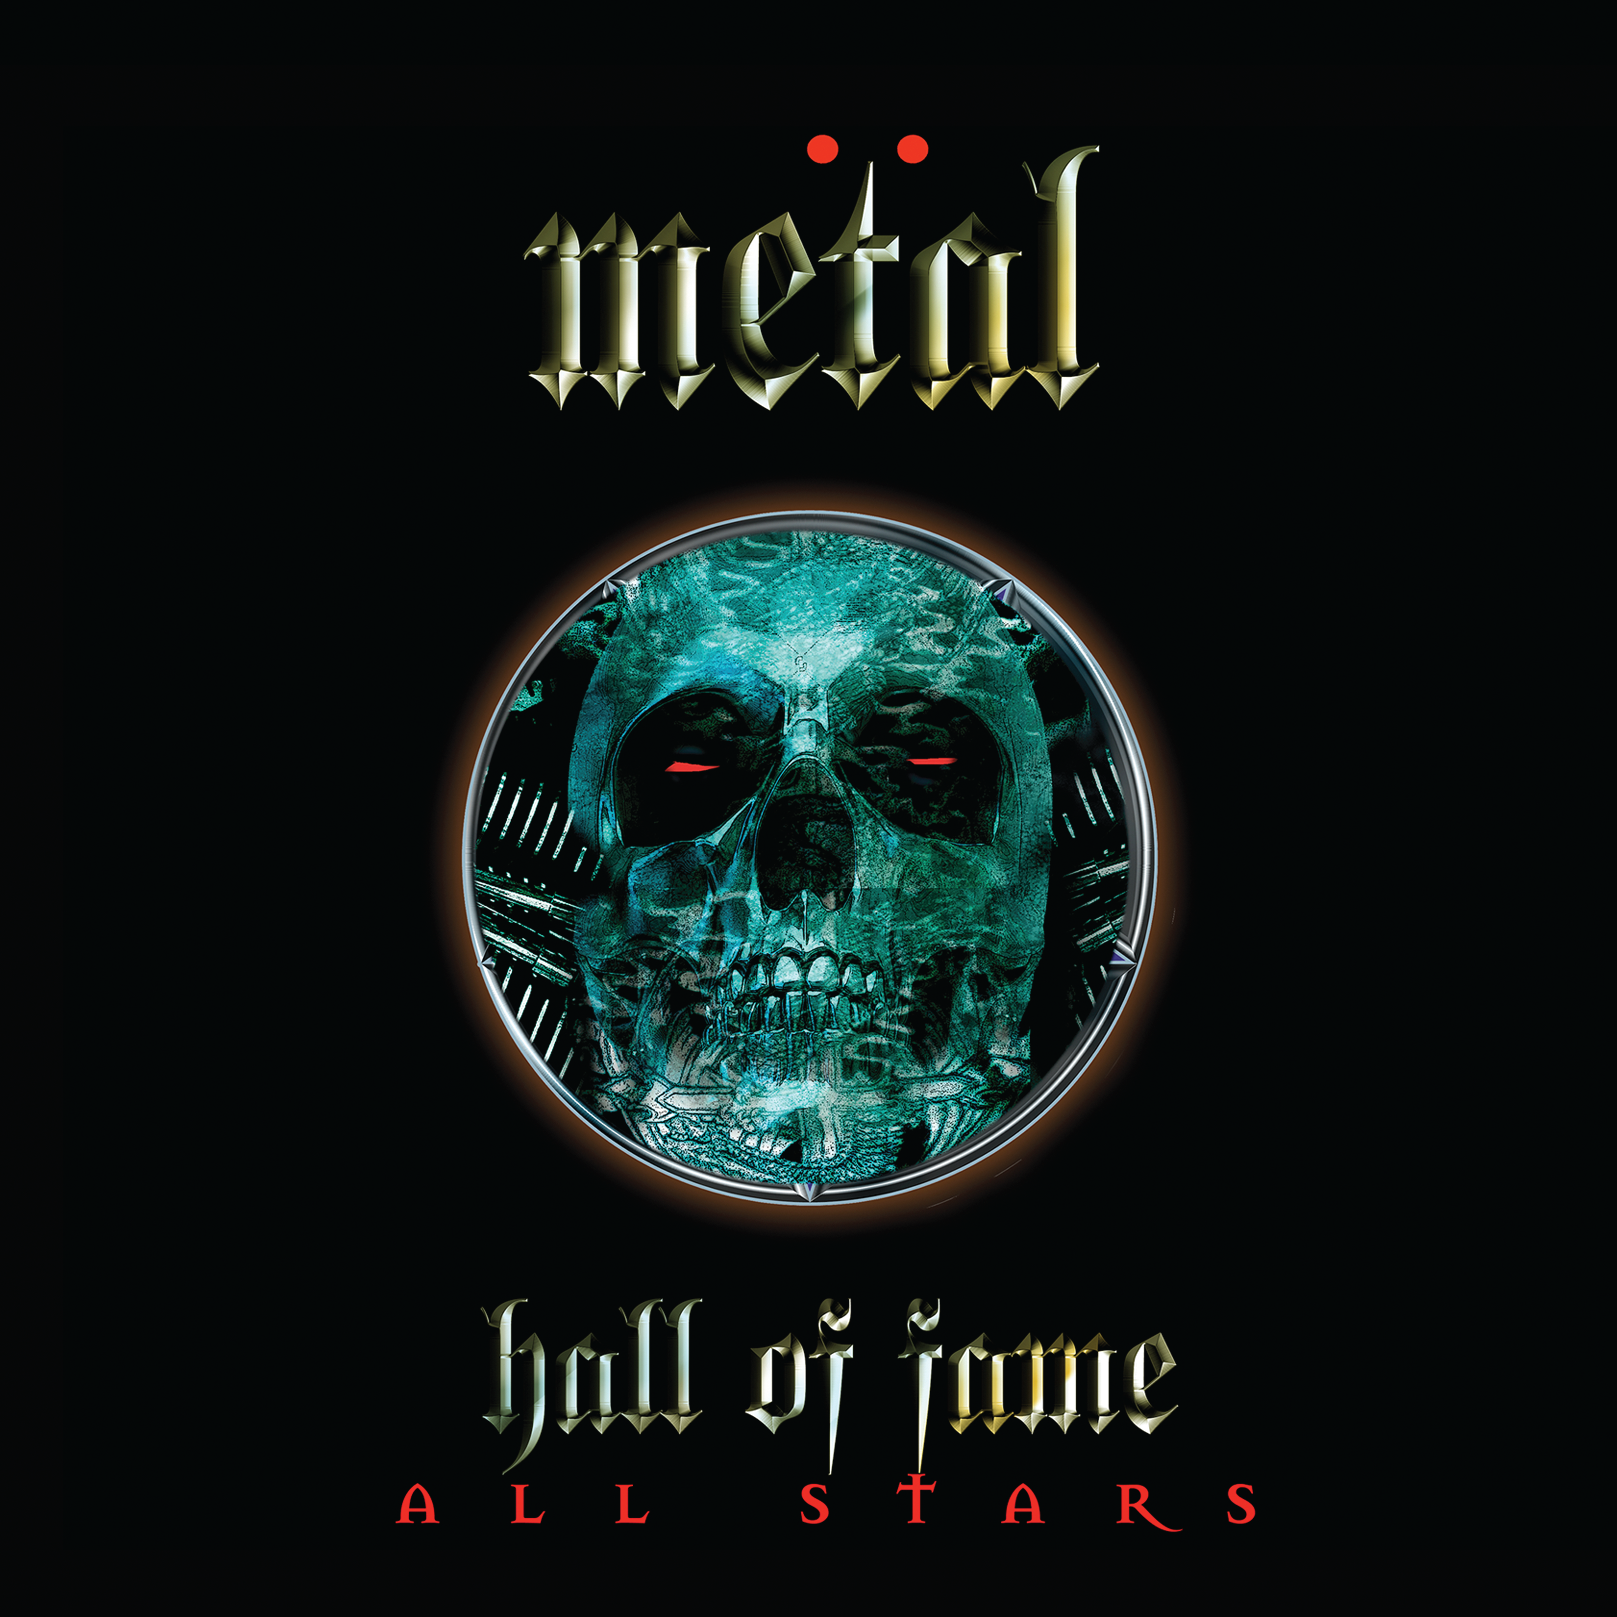 THE METAL HALL OF FAME RELEASE THE METAL HALL OF FAME ALL STARS CD/DVD